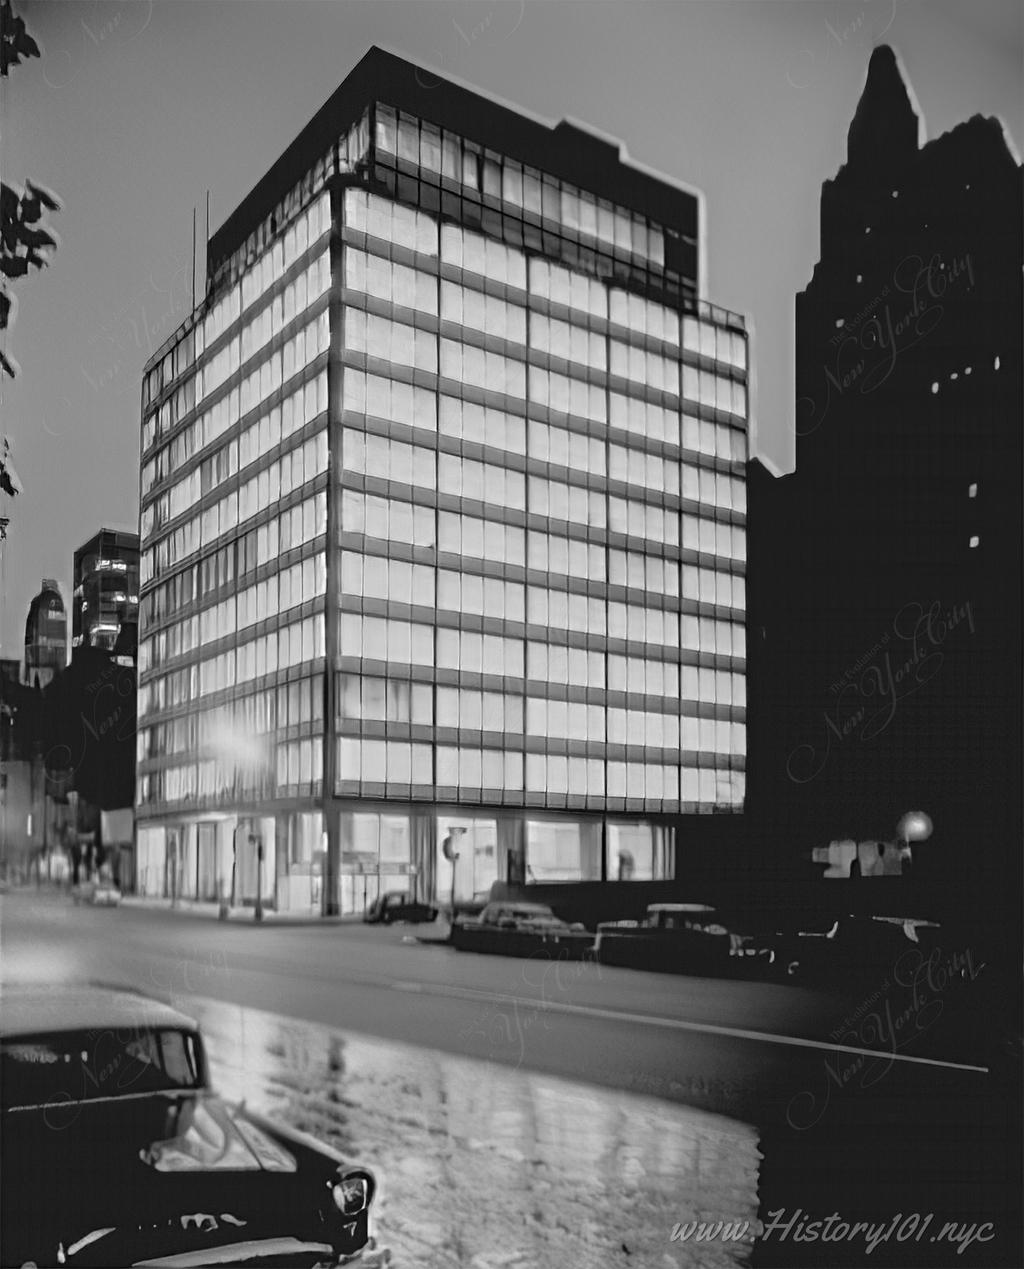 Photograph of the Girl Scout Building at 3rd Avenue and 51st Street, taken at night.